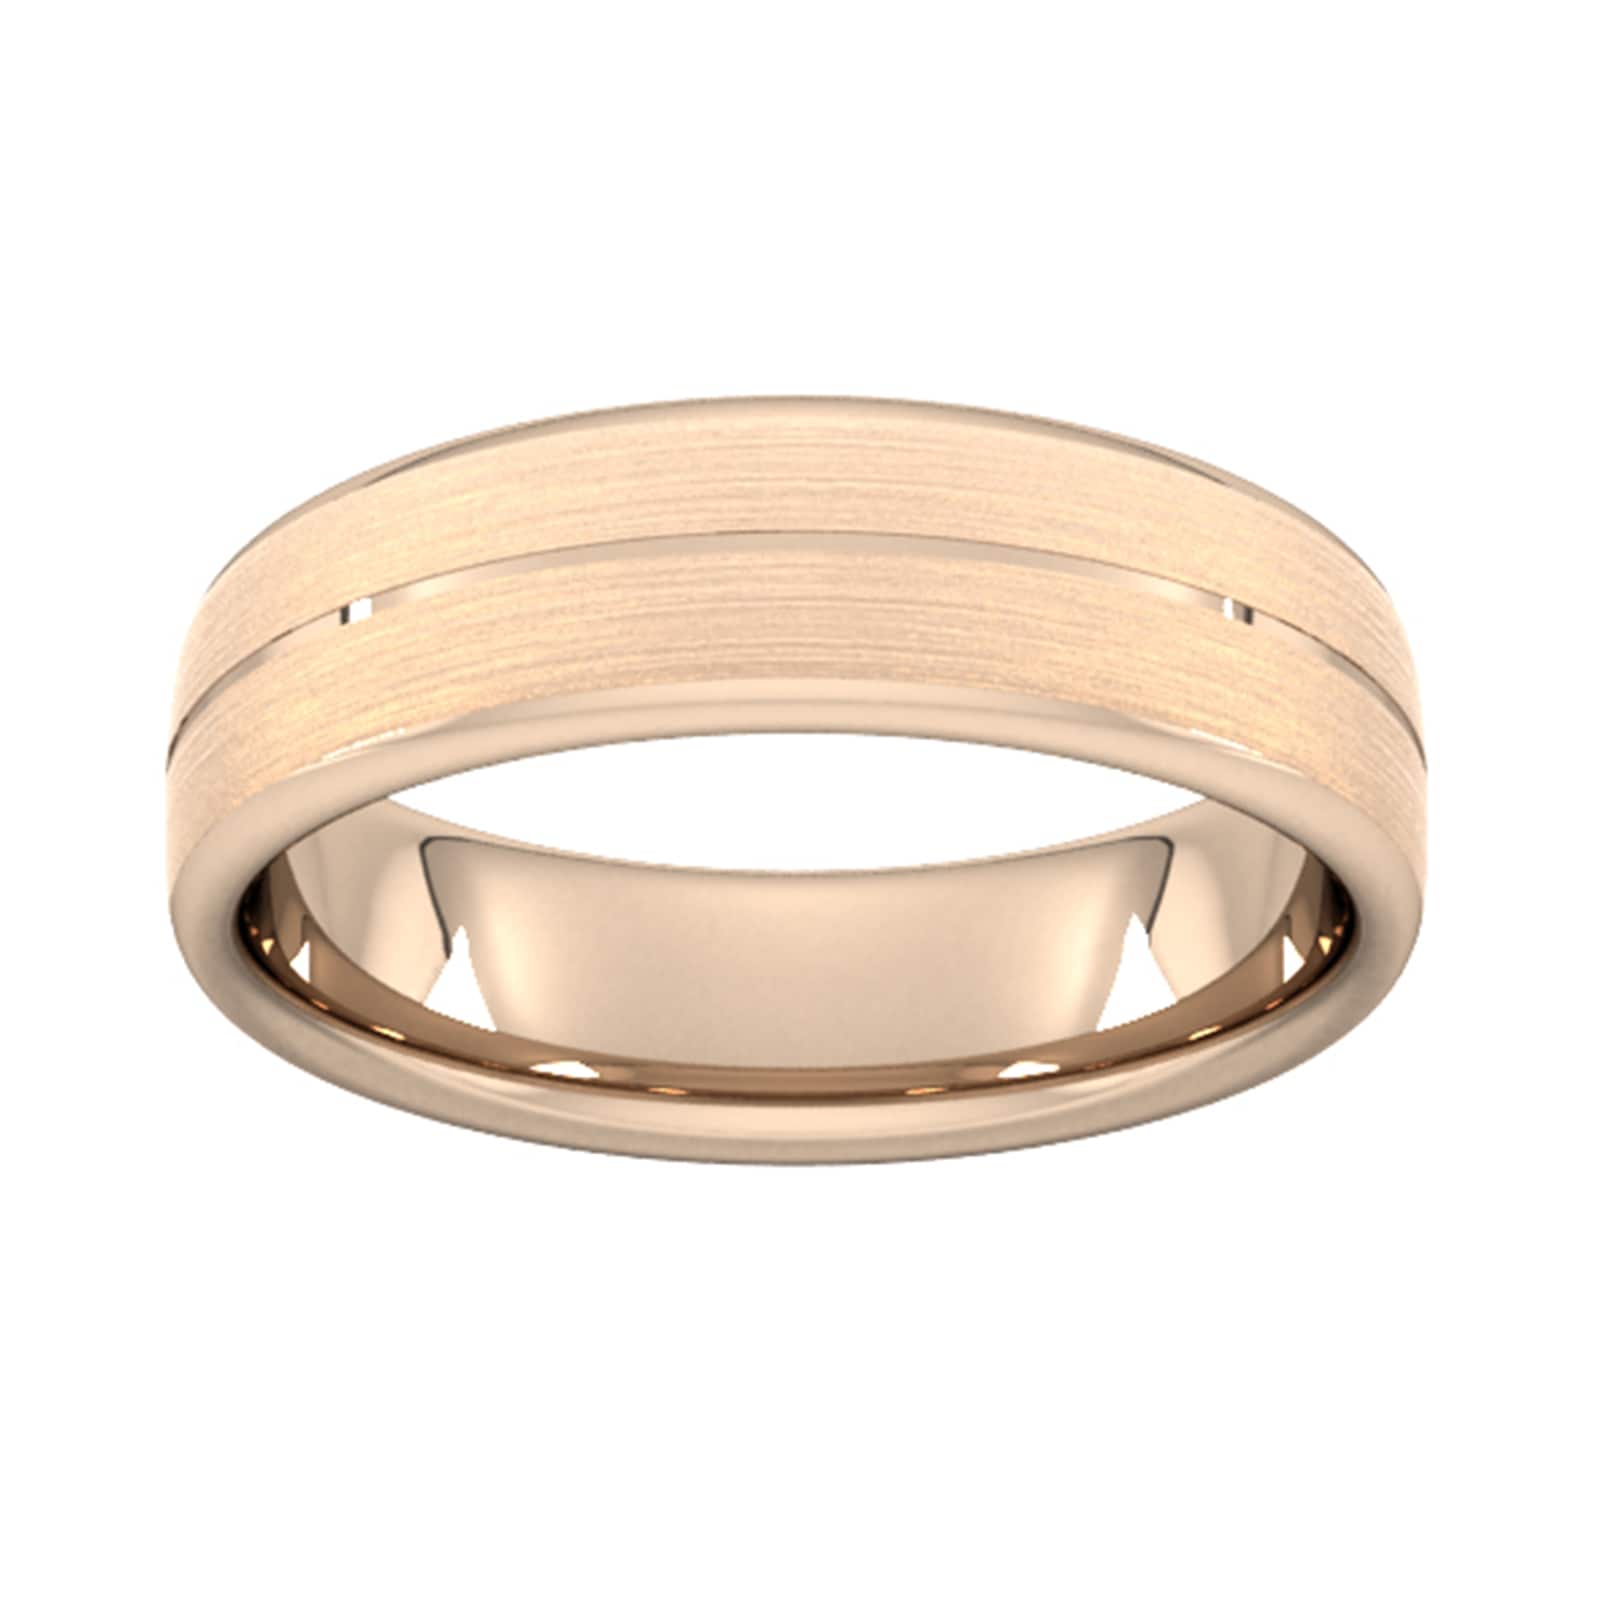 6mm Slight Court Standard Centre Groove With Chamfered Edge Wedding Ring In 18 Carat Rose Gold - Ring Size U